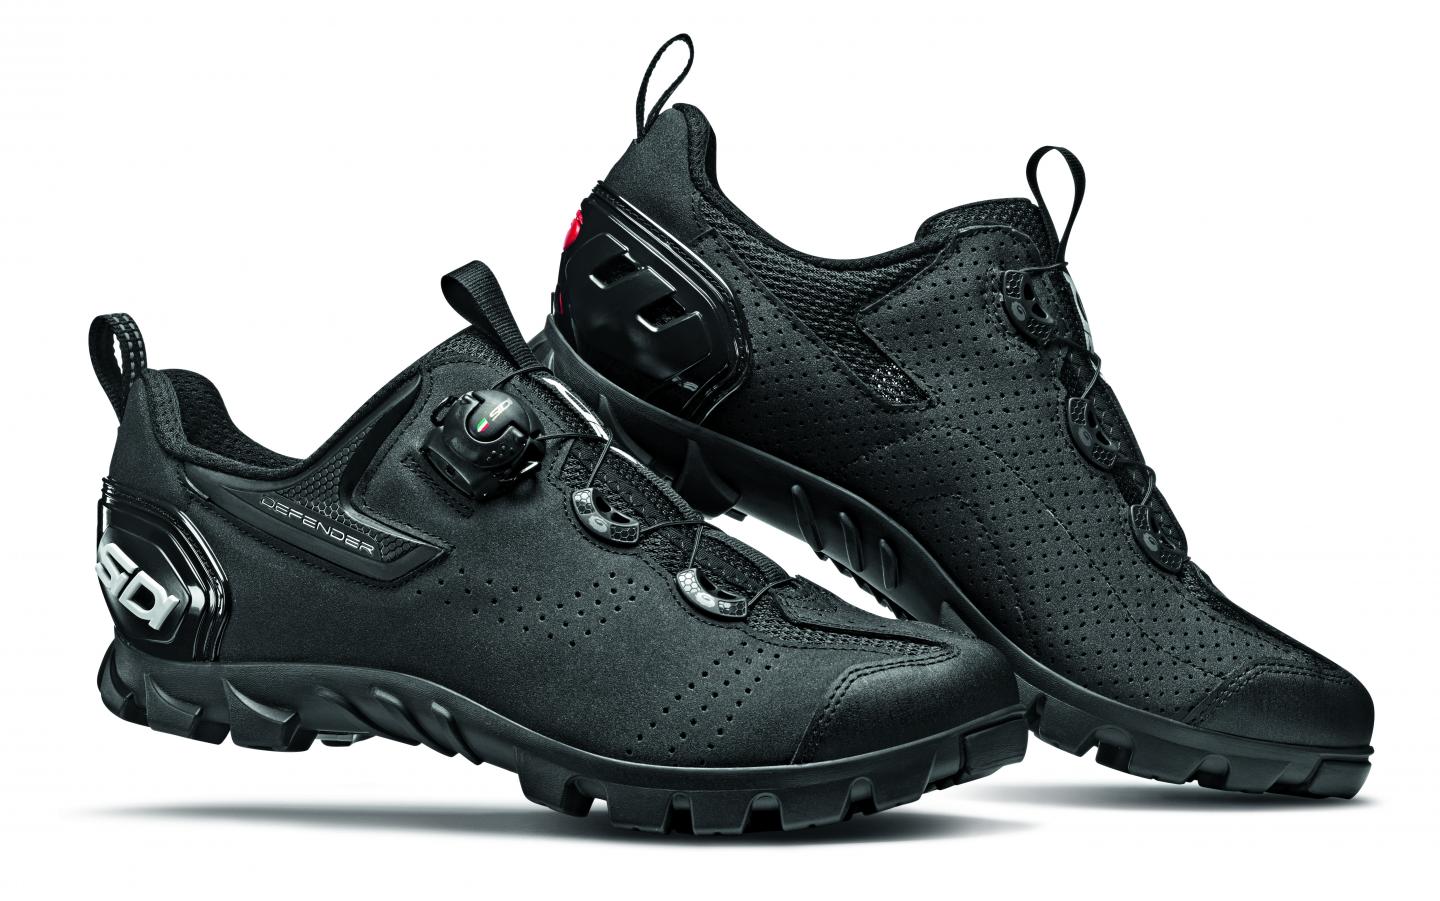 New Sidi Defender 20 - The modern trail shoe from an Icon